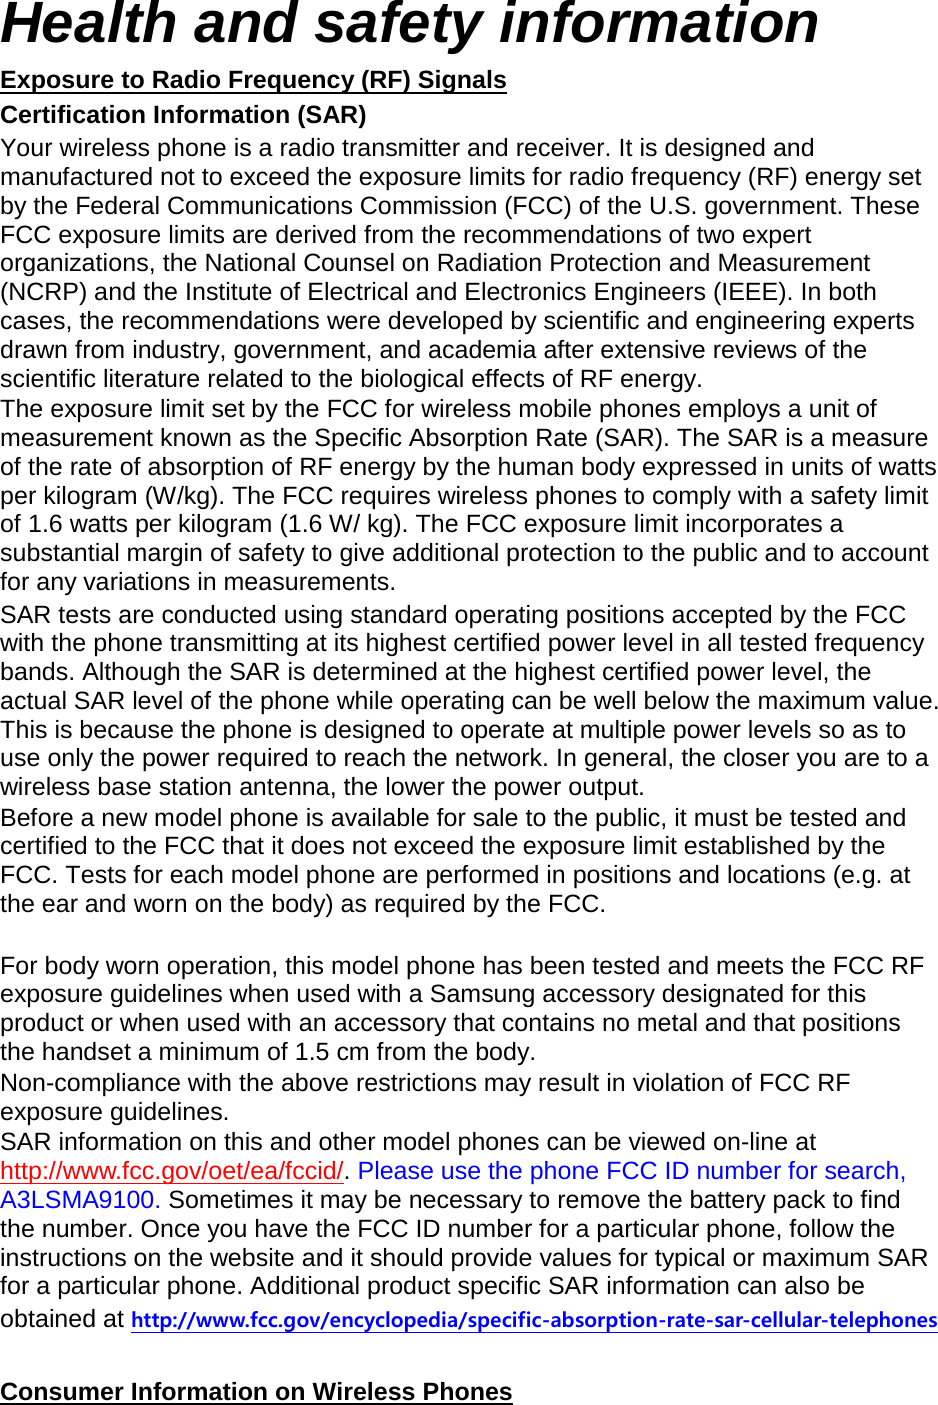 Health and safety information Exposure to Radio Frequency (RF) Signals Certification Information (SAR) Your wireless phone is a radio transmitter and receiver. It is designed and manufactured not to exceed the exposure limits for radio frequency (RF) energy set by the Federal Communications Commission (FCC) of the U.S. government. These FCC exposure limits are derived from the recommendations of two expert organizations, the National Counsel on Radiation Protection and Measurement (NCRP) and the Institute of Electrical and Electronics Engineers (IEEE). In both cases, the recommendations were developed by scientific and engineering experts drawn from industry, government, and academia after extensive reviews of the scientific literature related to the biological effects of RF energy. The exposure limit set by the FCC for wireless mobile phones employs a unit of measurement known as the Specific Absorption Rate (SAR). The SAR is a measure of the rate of absorption of RF energy by the human body expressed in units of watts per kilogram (W/kg). The FCC requires wireless phones to comply with a safety limit of 1.6 watts per kilogram (1.6 W/ kg). The FCC exposure limit incorporates a substantial margin of safety to give additional protection to the public and to account for any variations in measurements. SAR tests are conducted using standard operating positions accepted by the FCC with the phone transmitting at its highest certified power level in all tested frequency bands. Although the SAR is determined at the highest certified power level, the actual SAR level of the phone while operating can be well below the maximum value. This is because the phone is designed to operate at multiple power levels so as to use only the power required to reach the network. In general, the closer you are to a wireless base station antenna, the lower the power output. Before a new model phone is available for sale to the public, it must be tested and certified to the FCC that it does not exceed the exposure limit established by the FCC. Tests for each model phone are performed in positions and locations (e.g. at the ear and worn on the body) as required by the FCC.      For body worn operation, this model phone has been tested and meets the FCC RF exposure guidelines when used with a Samsung accessory designated for this product or when used with an accessory that contains no metal and that positions the handset a minimum of 1.5 cm from the body.   Non-compliance with the above restrictions may result in violation of FCC RF exposure guidelines. SAR information on this and other model phones can be viewed on-line at http://www.fcc.gov/oet/ea/fccid/. Please use the phone FCC ID number for search, A3LSMA9100. Sometimes it may be necessary to remove the battery pack to find the number. Once you have the FCC ID number for a particular phone, follow the instructions on the website and it should provide values for typical or maximum SAR for a particular phone. Additional product specific SAR information can also be obtained at http://www.fcc.gov/encyclopedia/specific-absorption-rate-sar-cellular-telephones  Consumer Information on Wireless Phones 